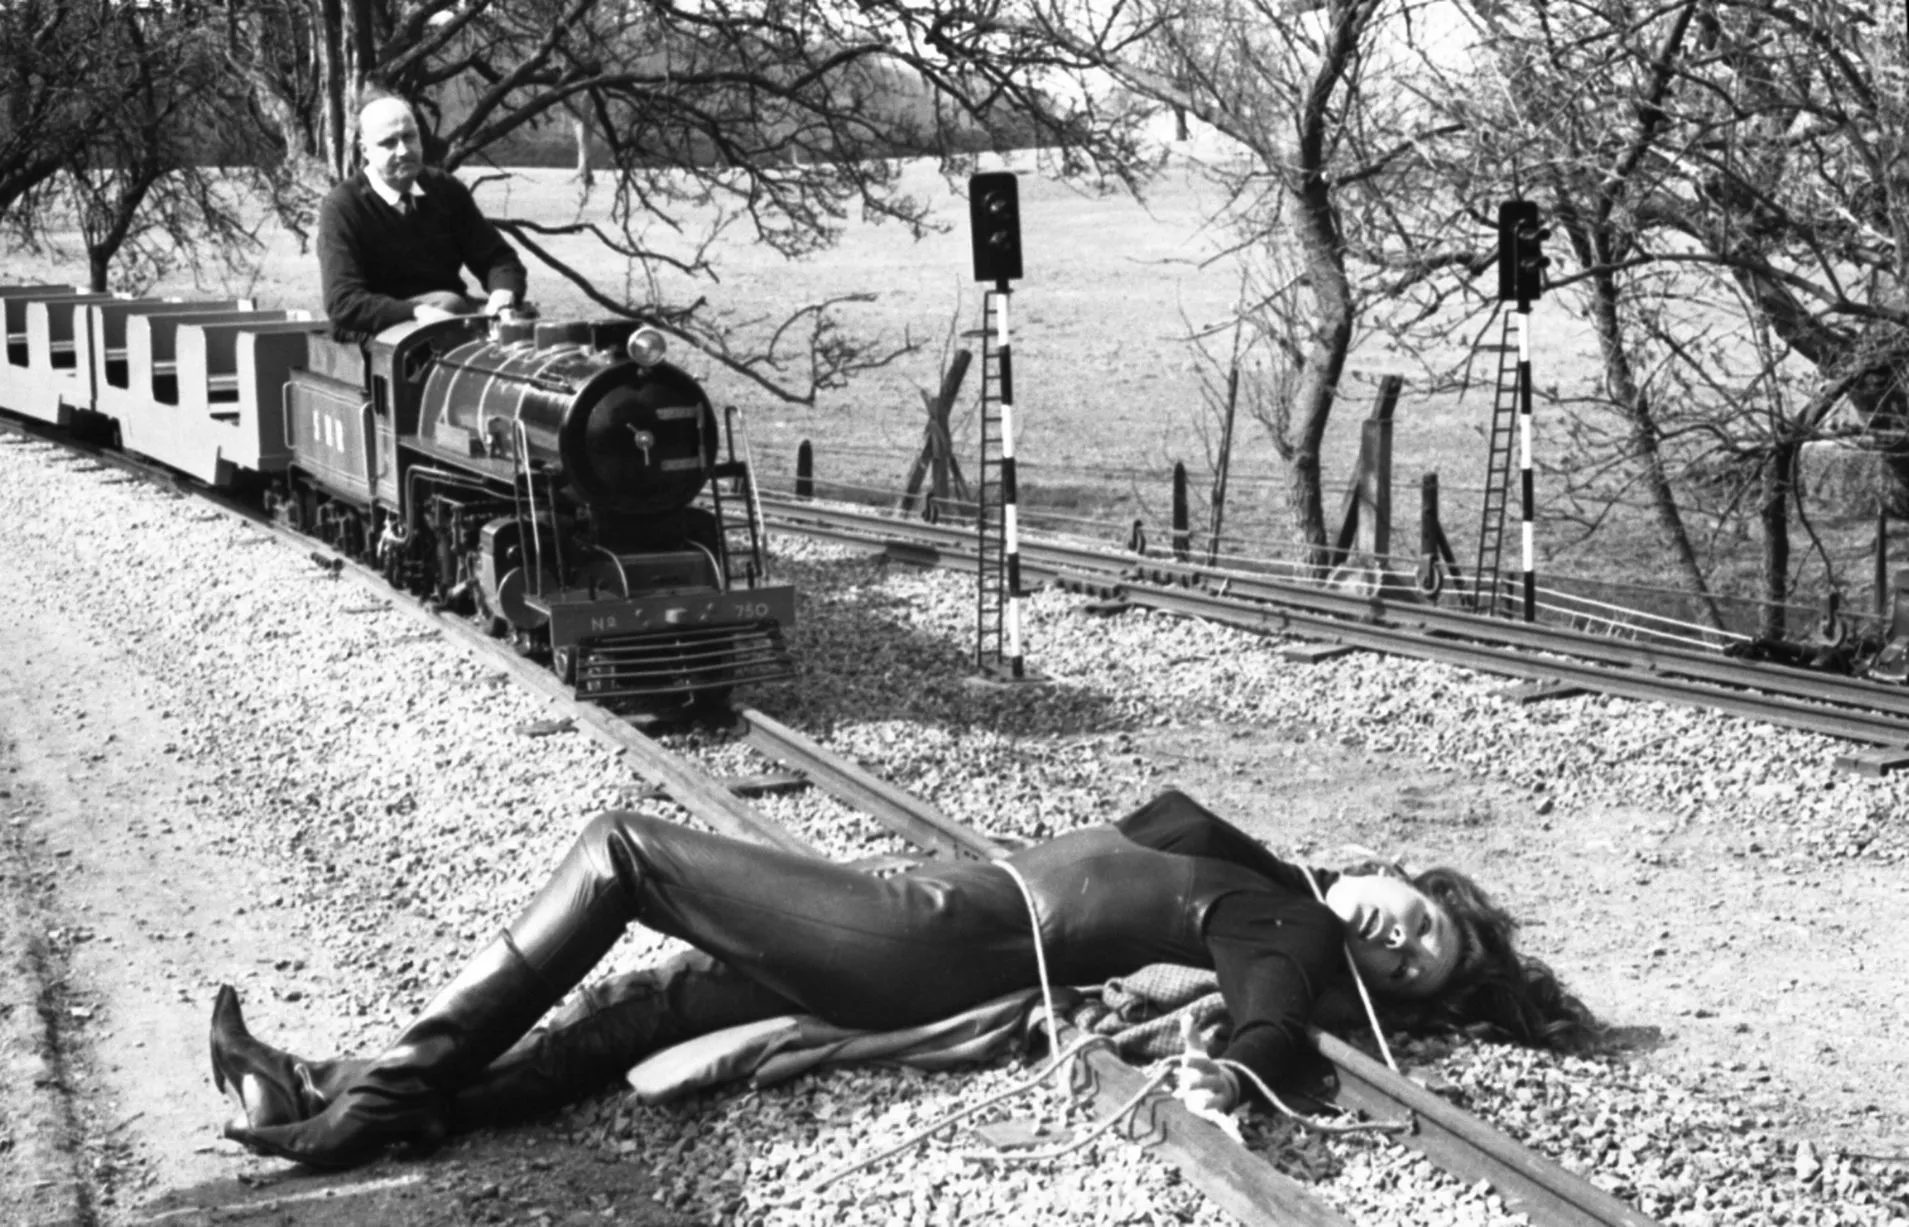 adewale tosin recommends Emma Peel Tied Up